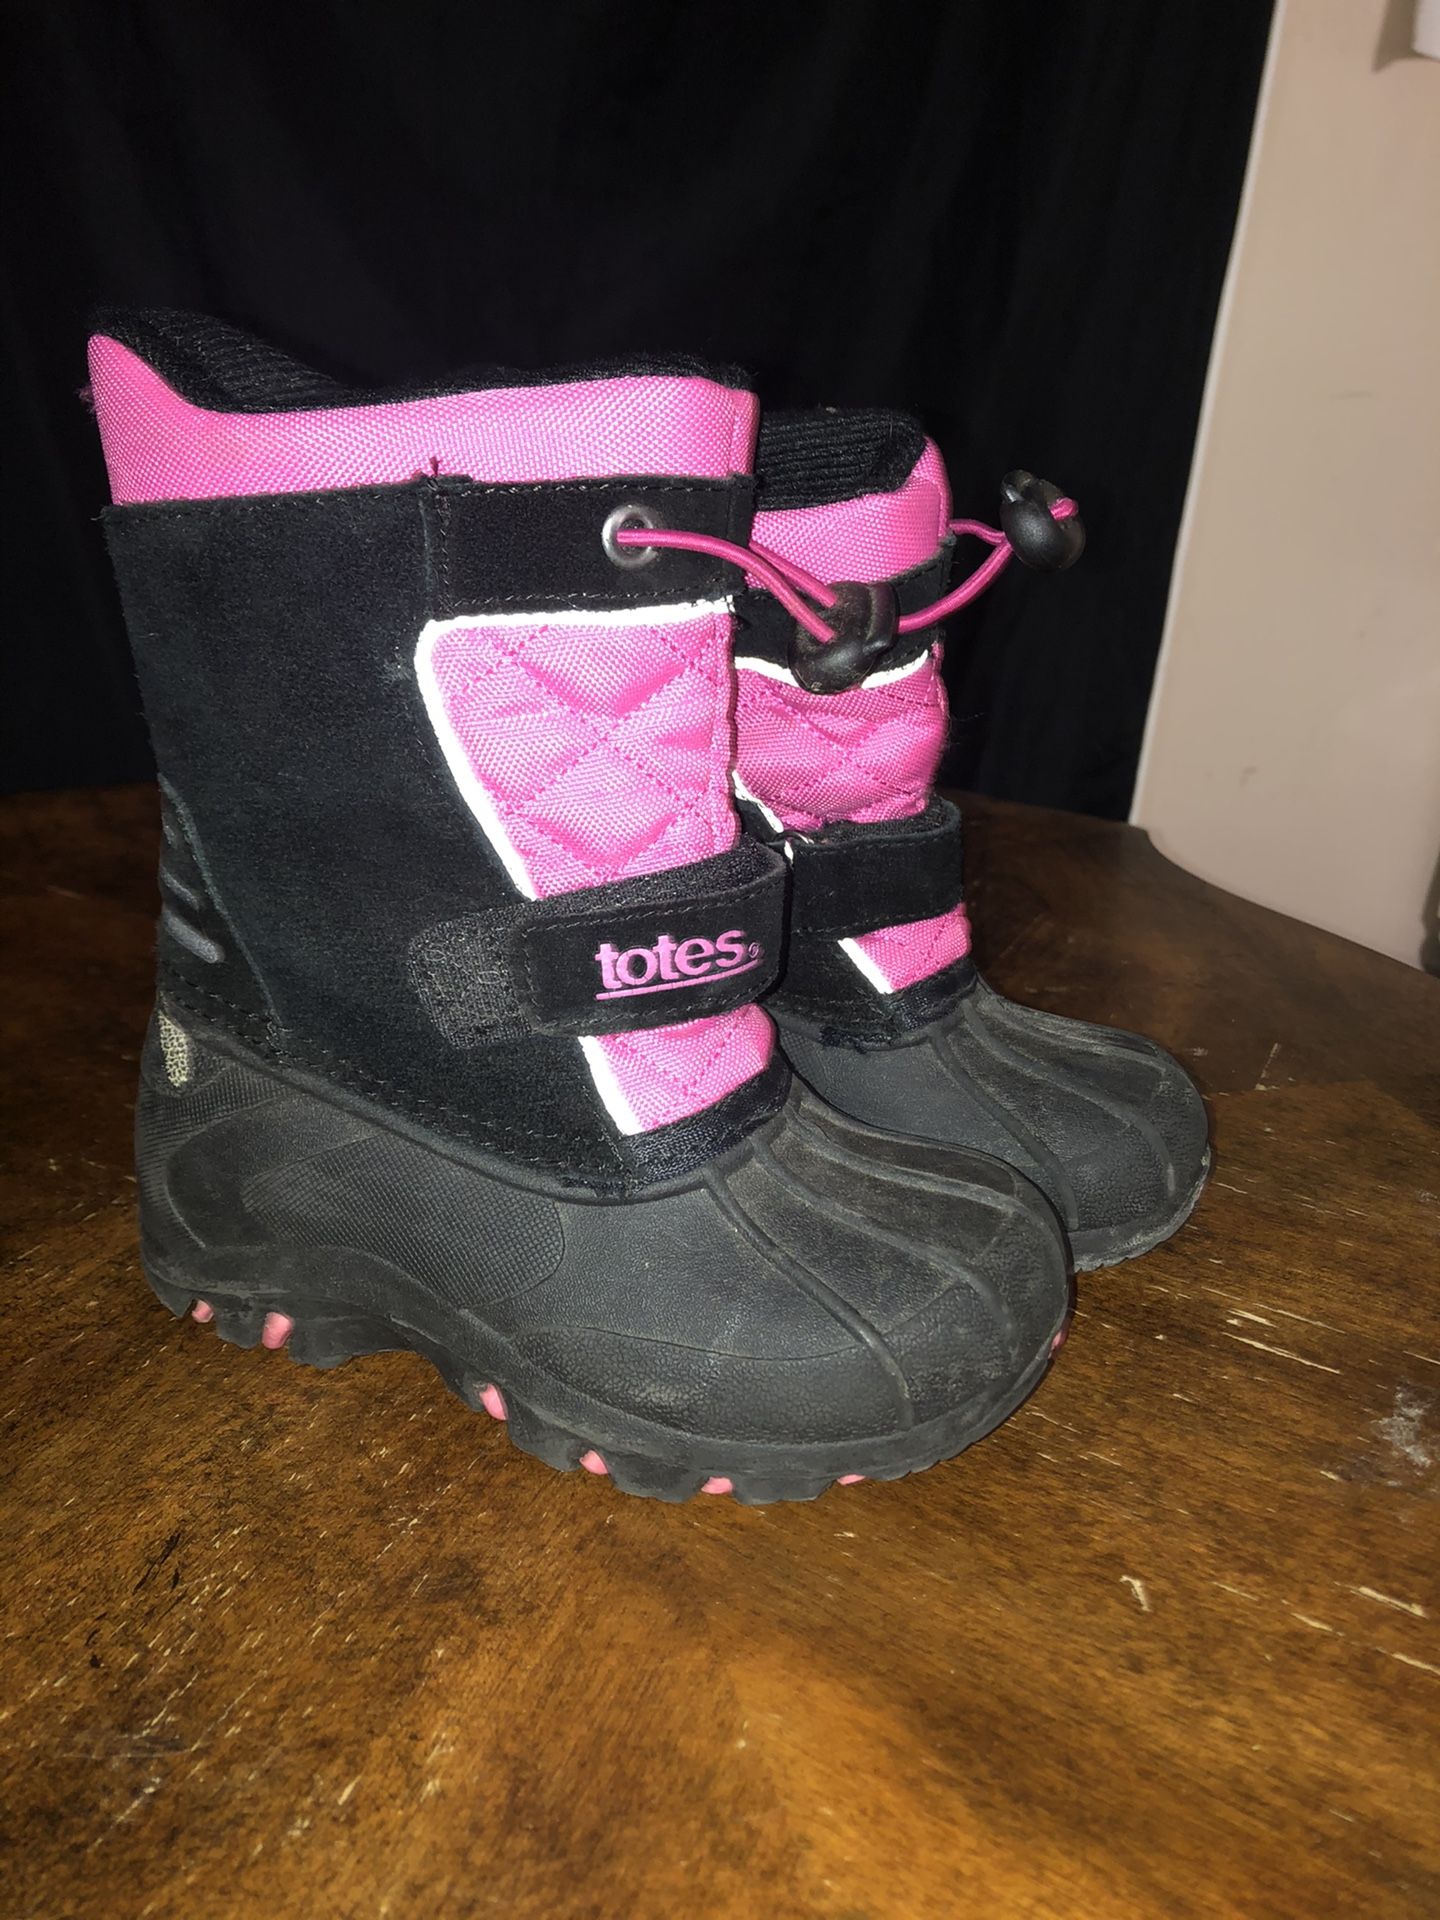 Totes (little girls boots)